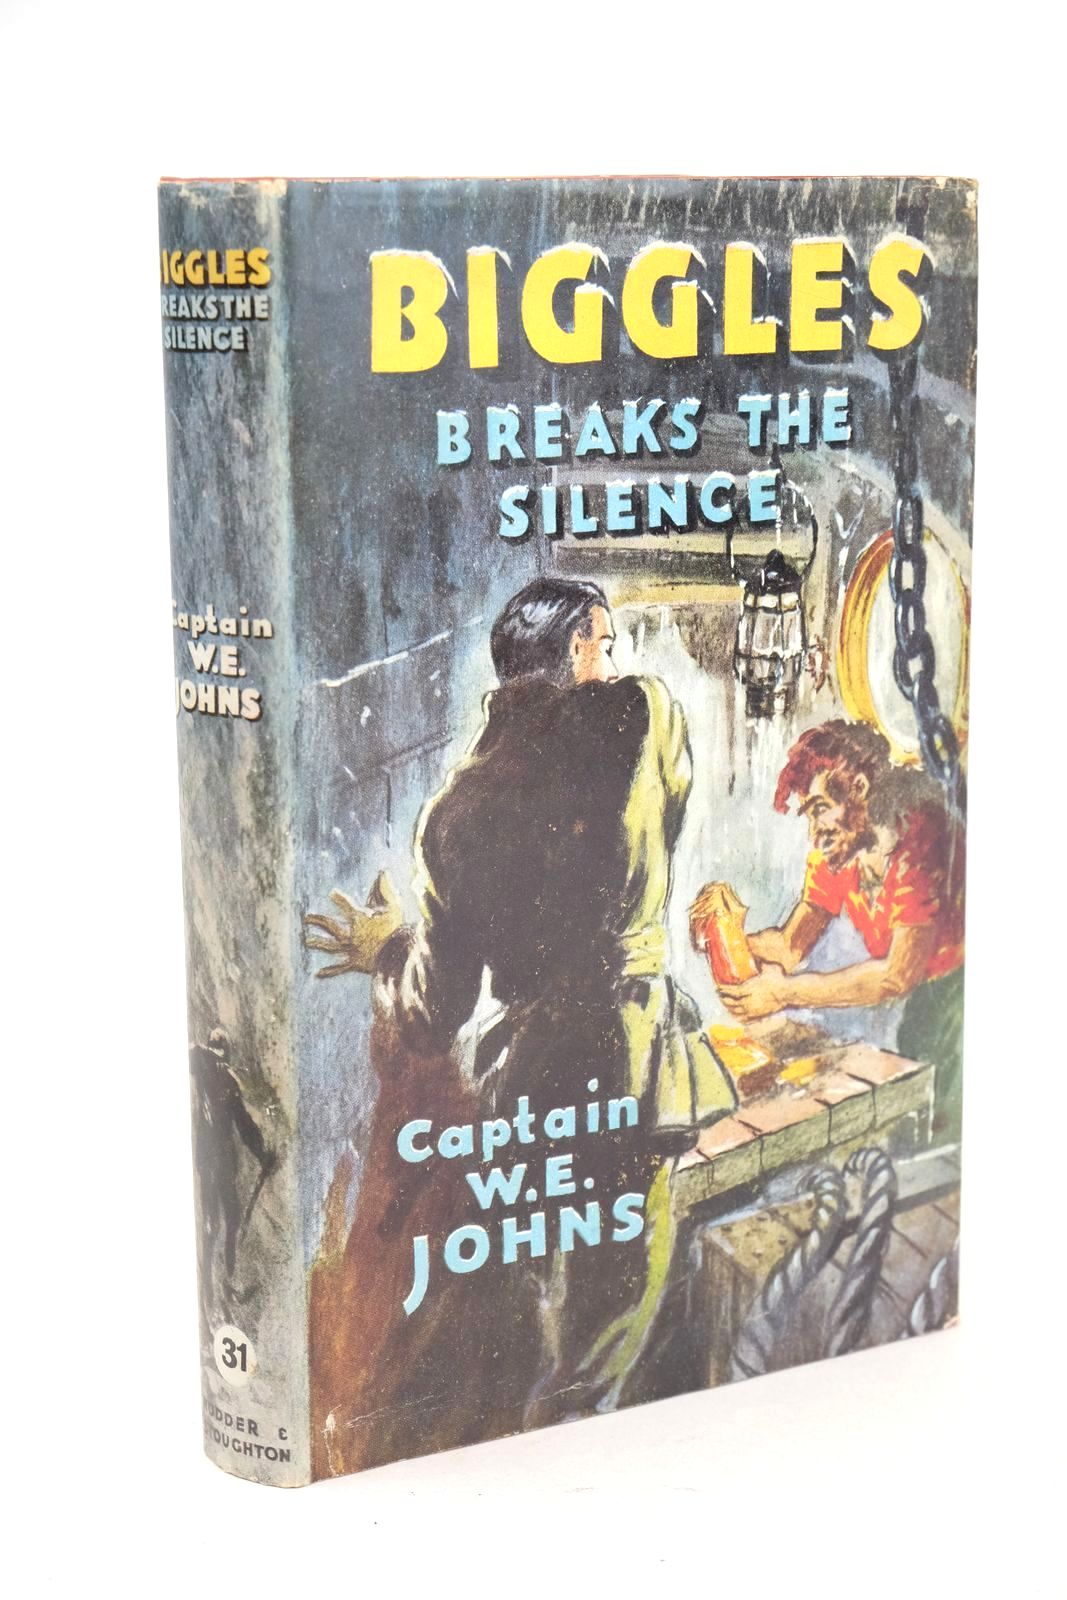 Photo of BIGGLES BREAKS THE SILENCE written by Johns, W.E. illustrated by Stead,  published by Hodder &amp; Stoughton (STOCK CODE: 1326107)  for sale by Stella & Rose's Books